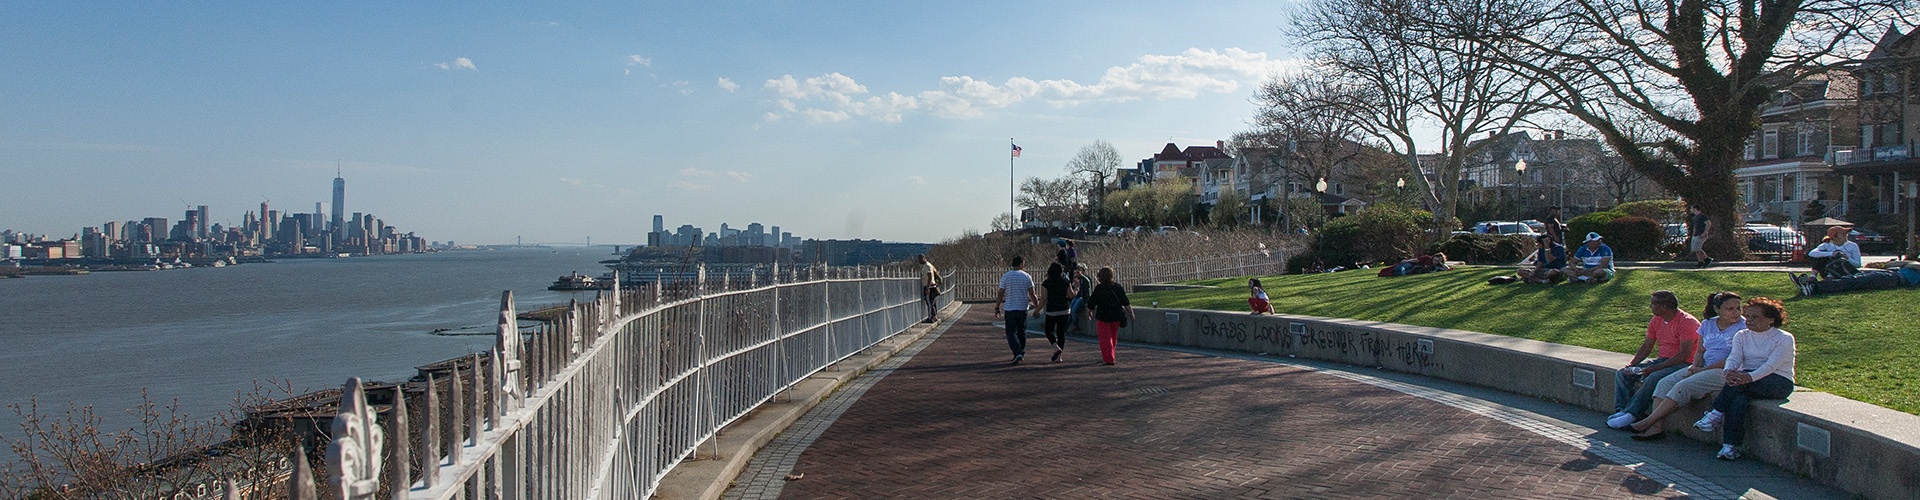 Wonderful Weehawken: 5 Reasons to Love this Tiny Township